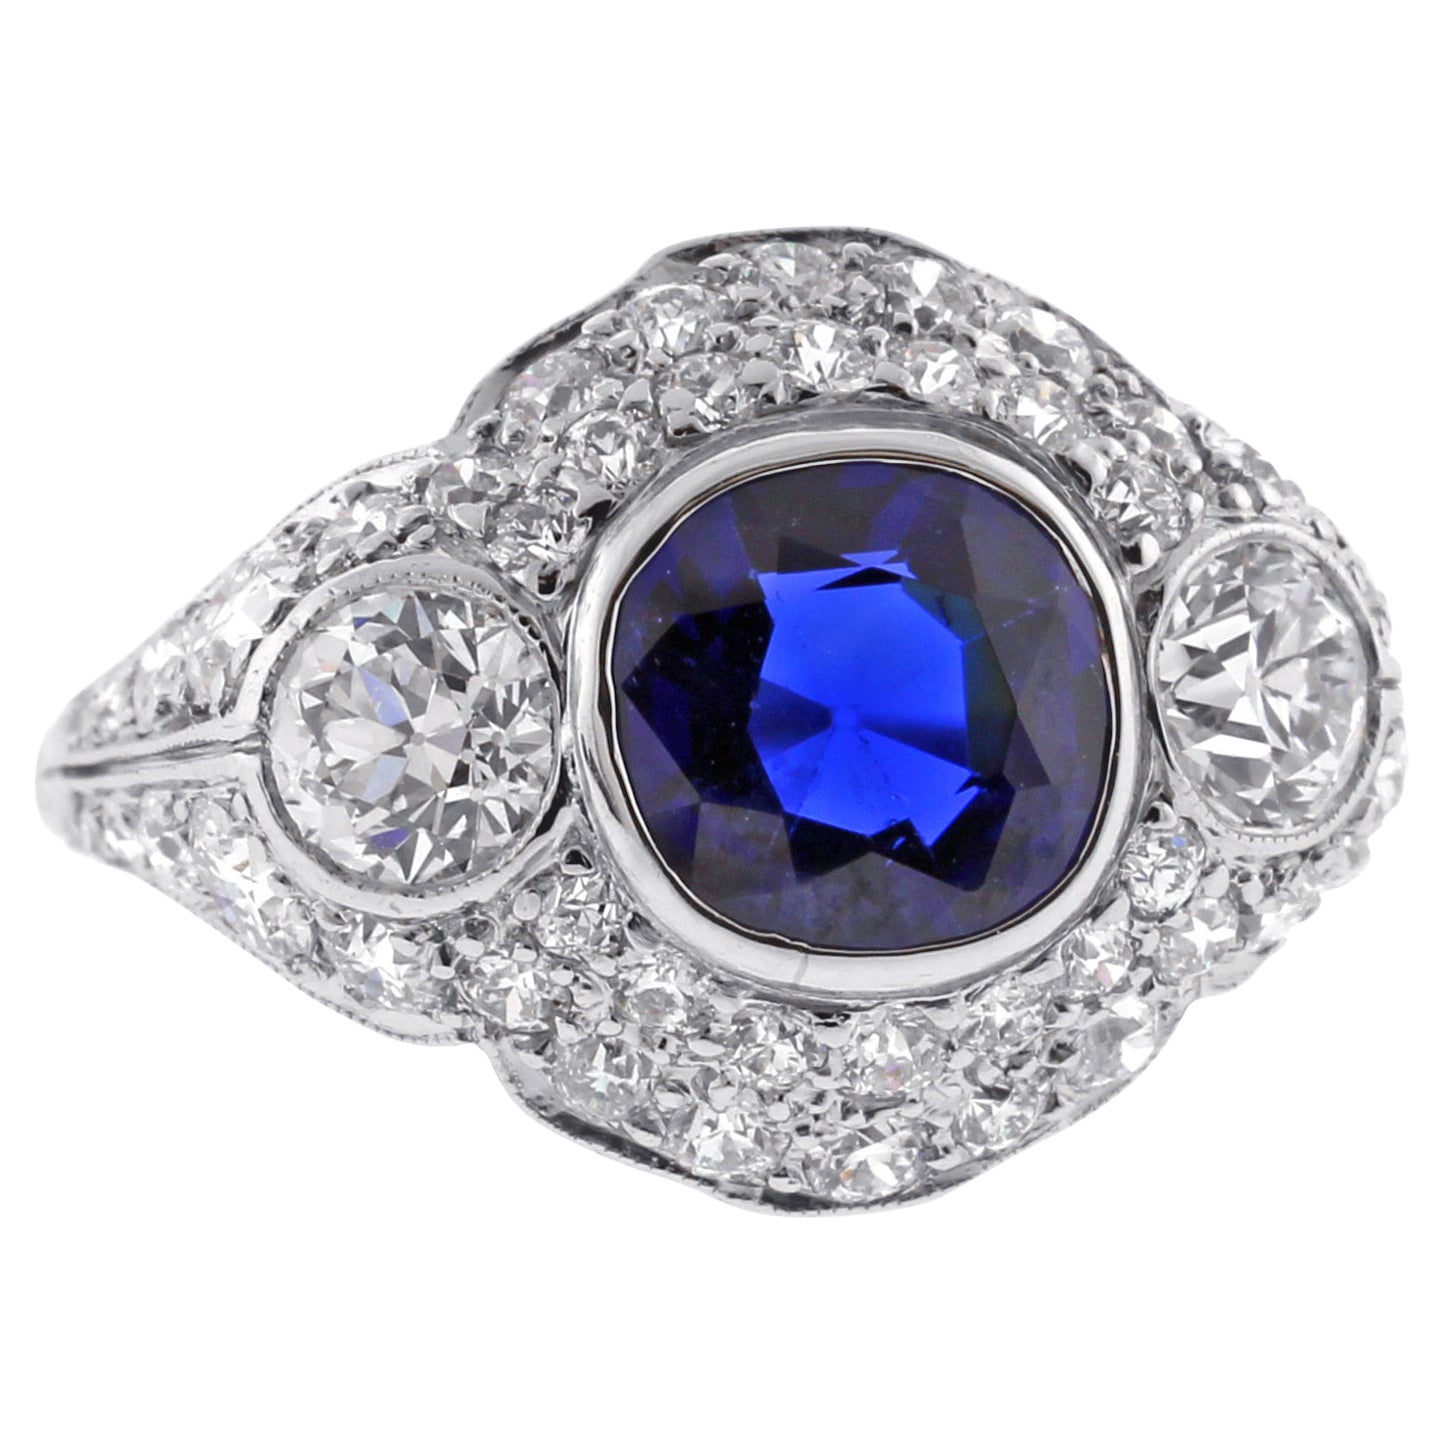 Tiffany & Co. Art Deco A.G.L Certified Sapphire and Diamond Ring